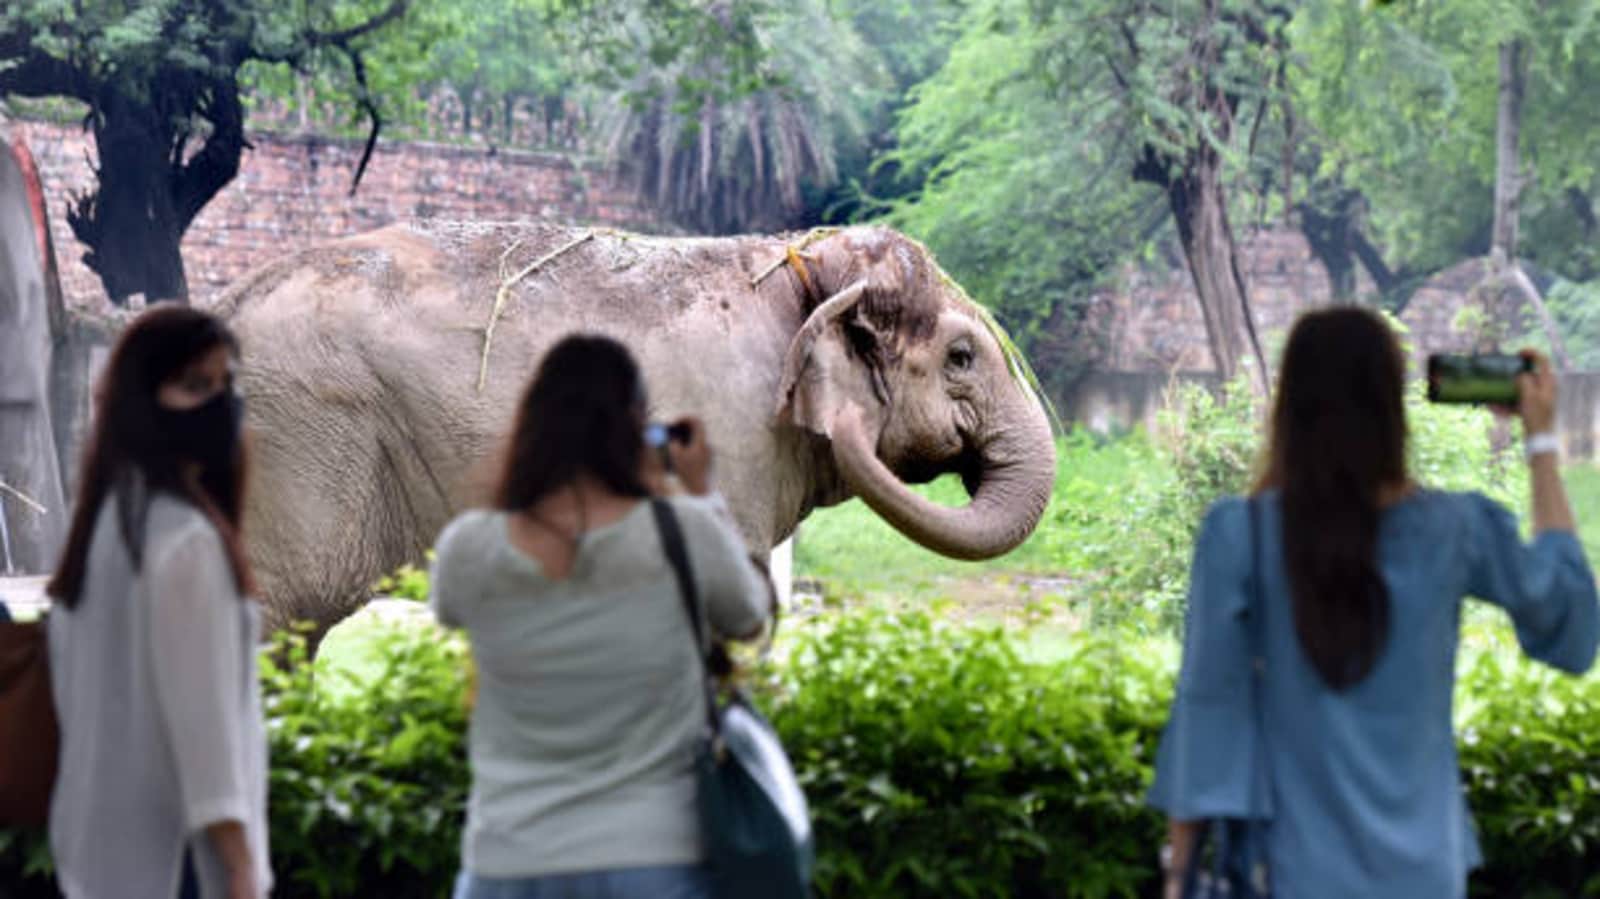 Top 5 most popular zoos in India you must visit | Travel - Hindustan Times